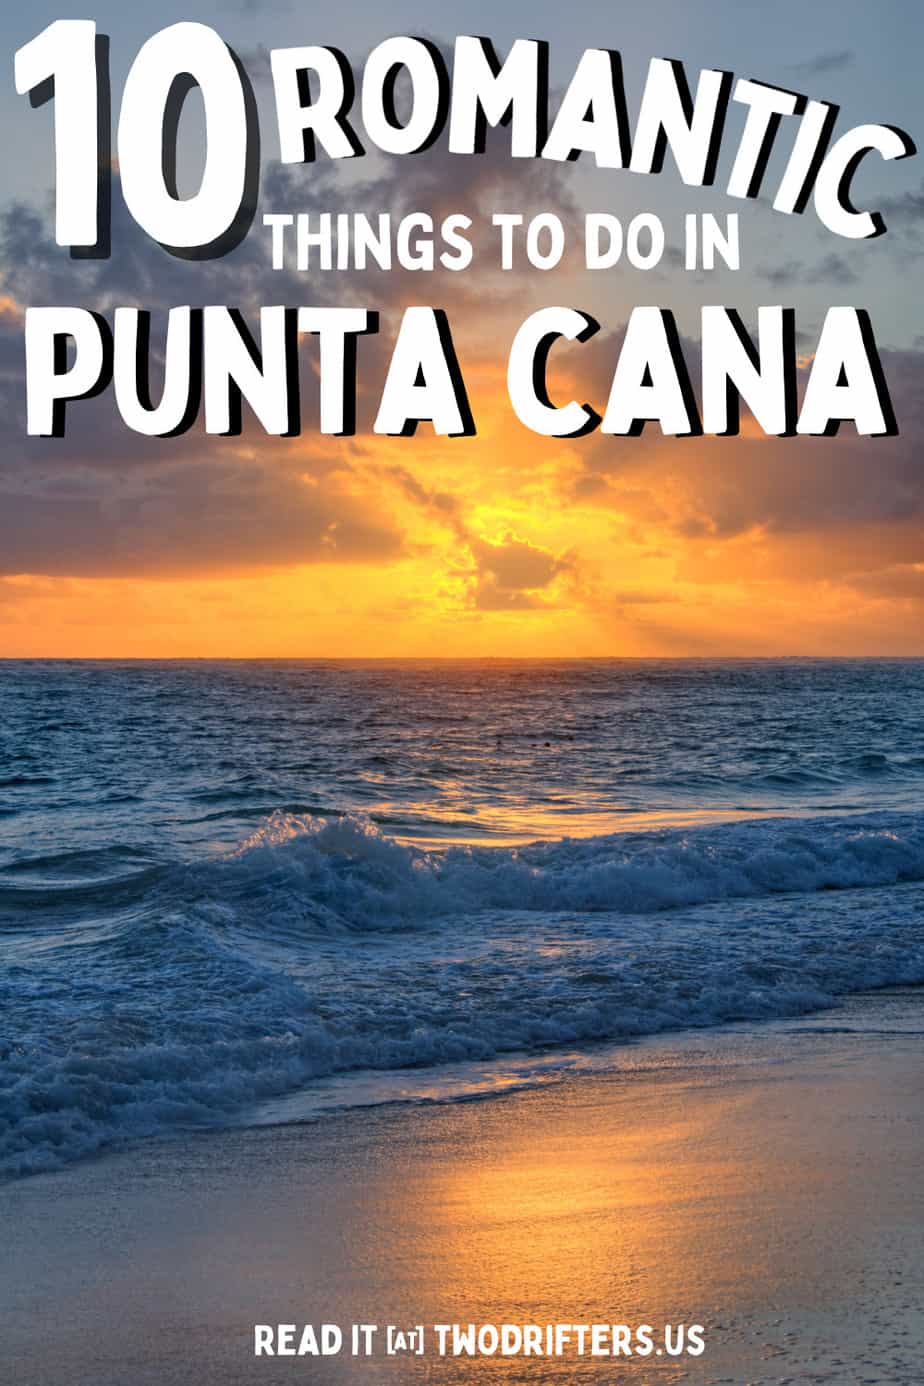 Pinterest social share image that says "10 Romantic Things to do in Punta Cana."